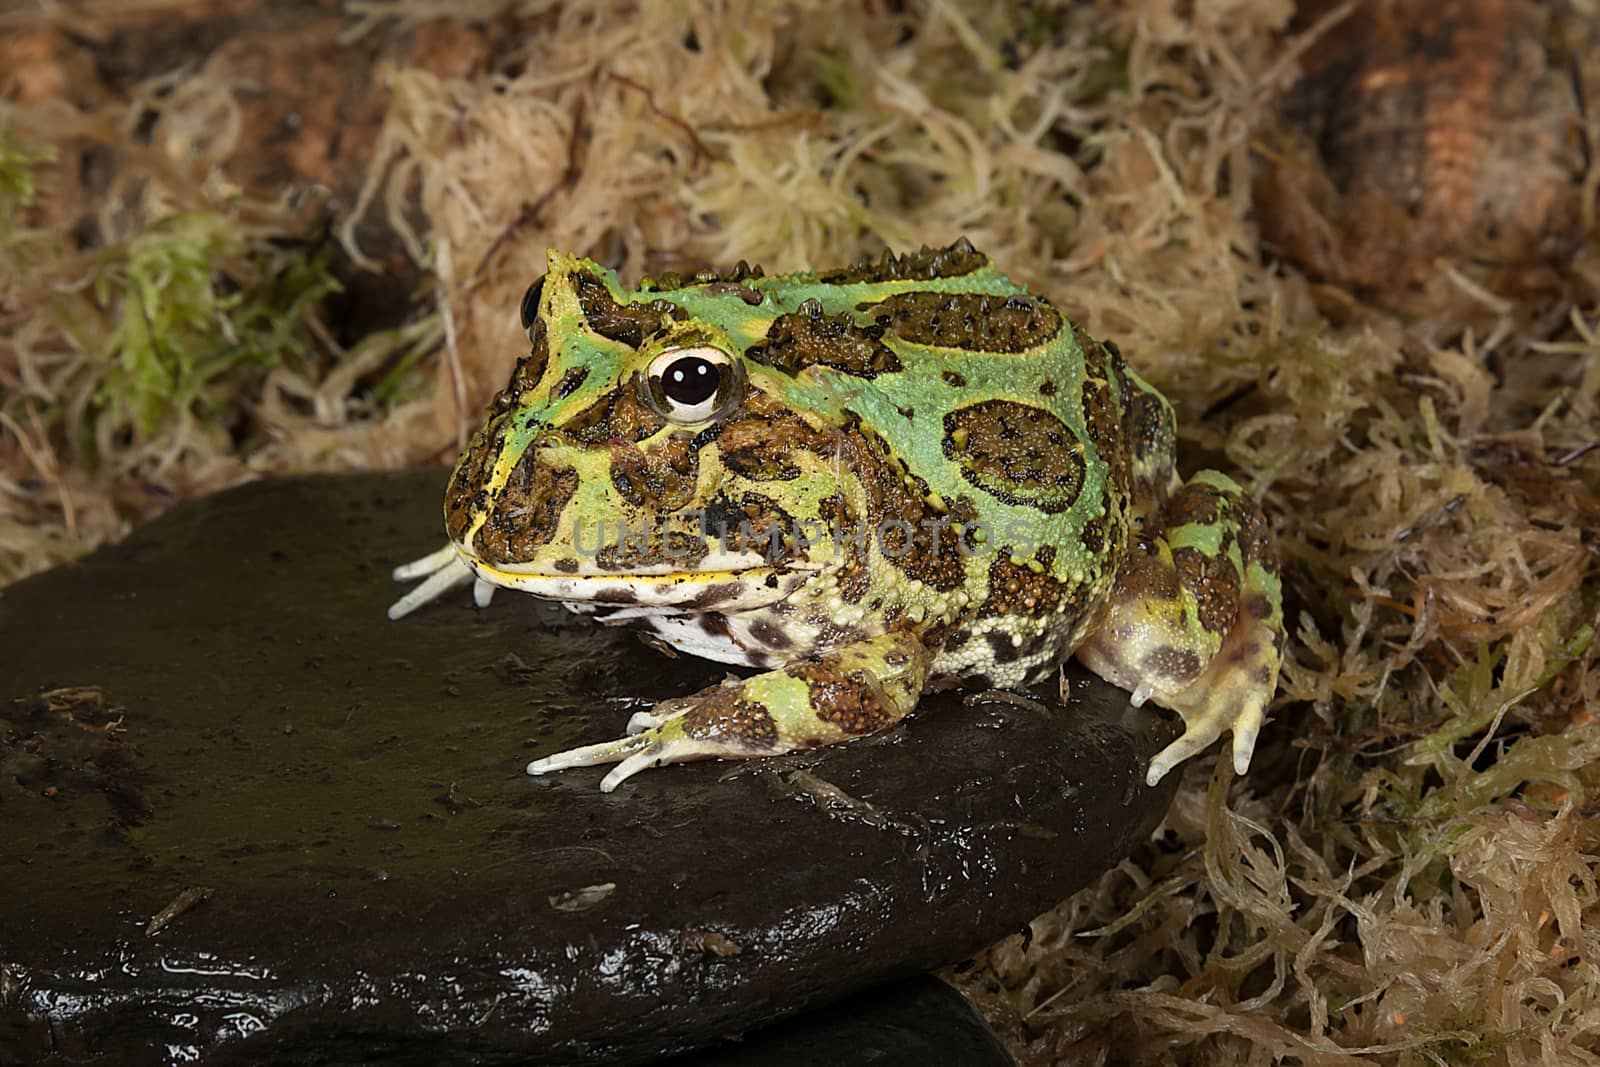 Bull frog by alan_tunnicliffe